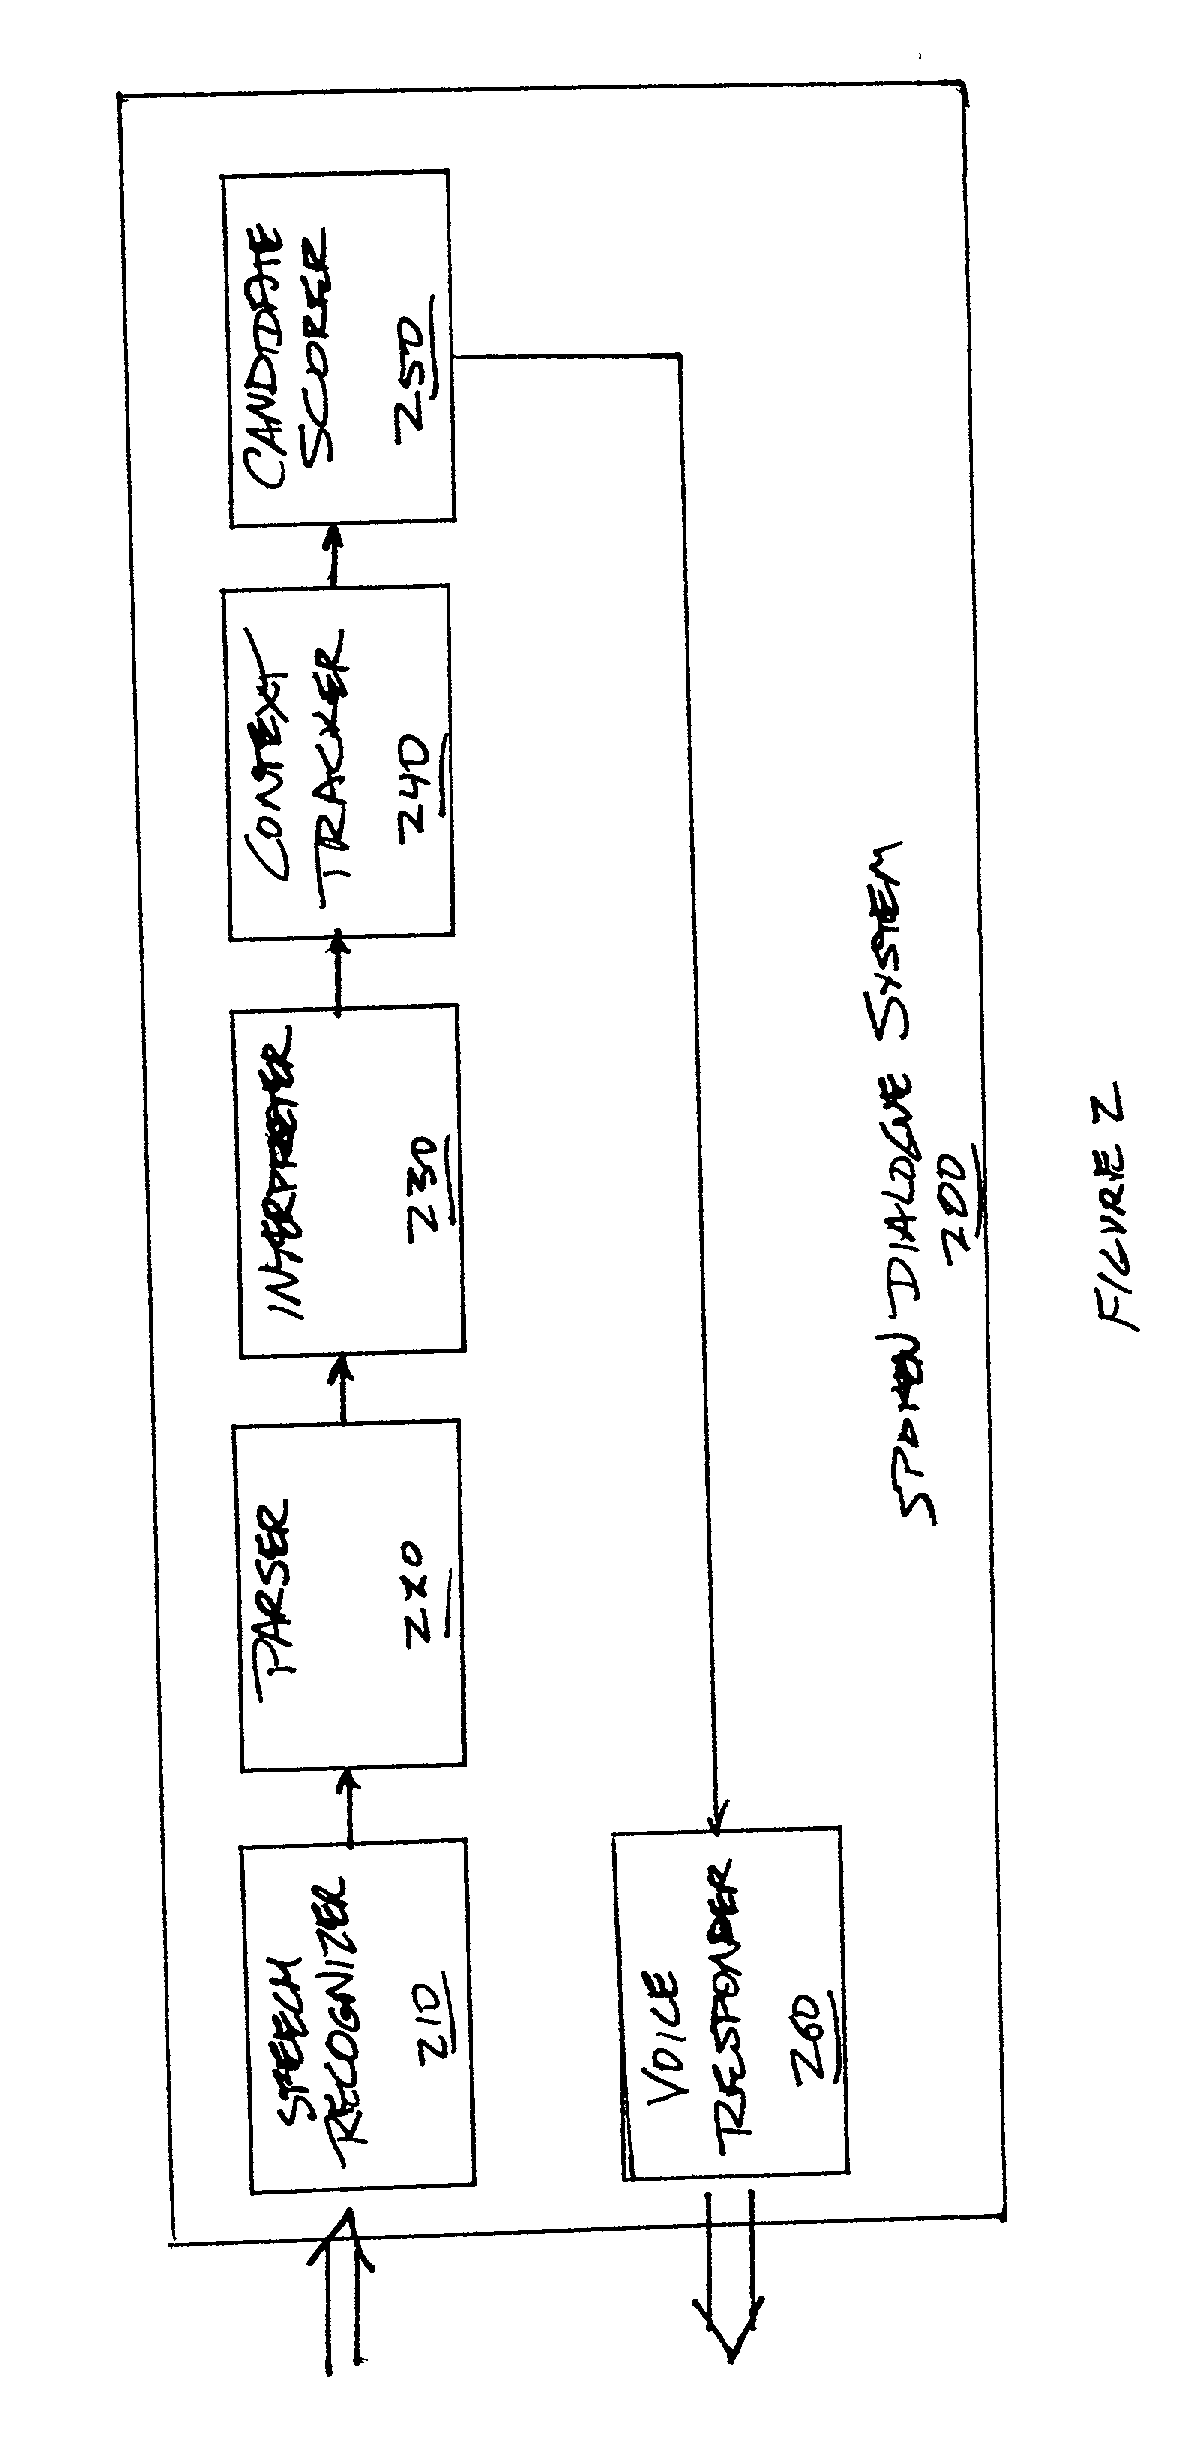 System and method for representing and resolving ambiguity in spoken dialogue systems